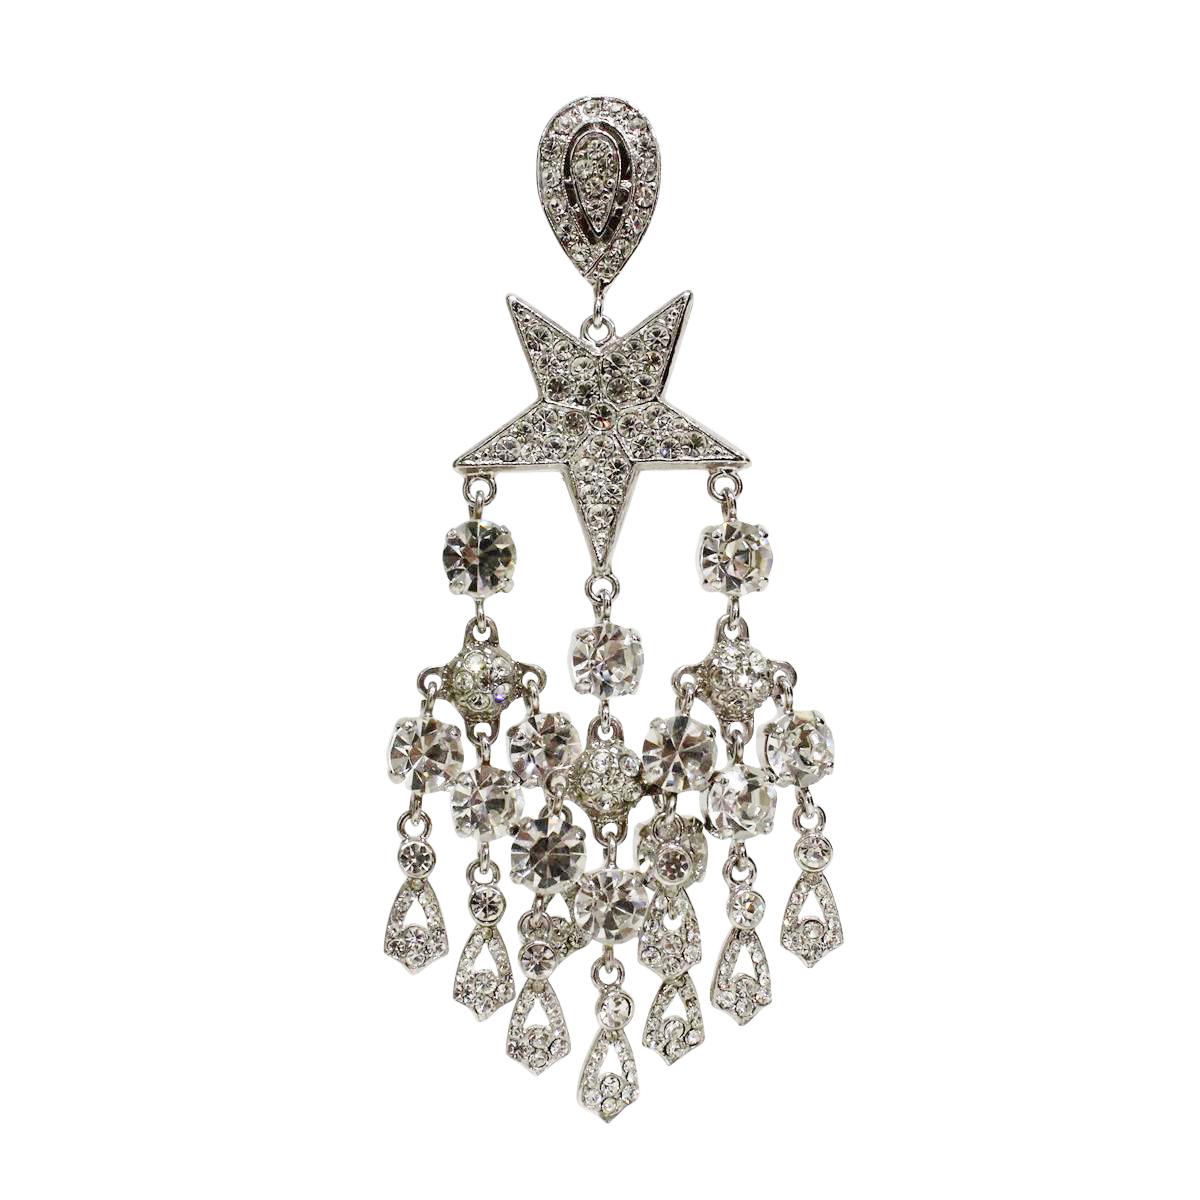 Super chic earrings by Carlo Zini
Mervellous earrings on Stars theme
Chandelier style
Non allergenic  brass
Rhodium 
Wonderful construction of swarovski crystals
100% Artisanal work
Made in Milan
Clip on, pierced on request
Worldwide express